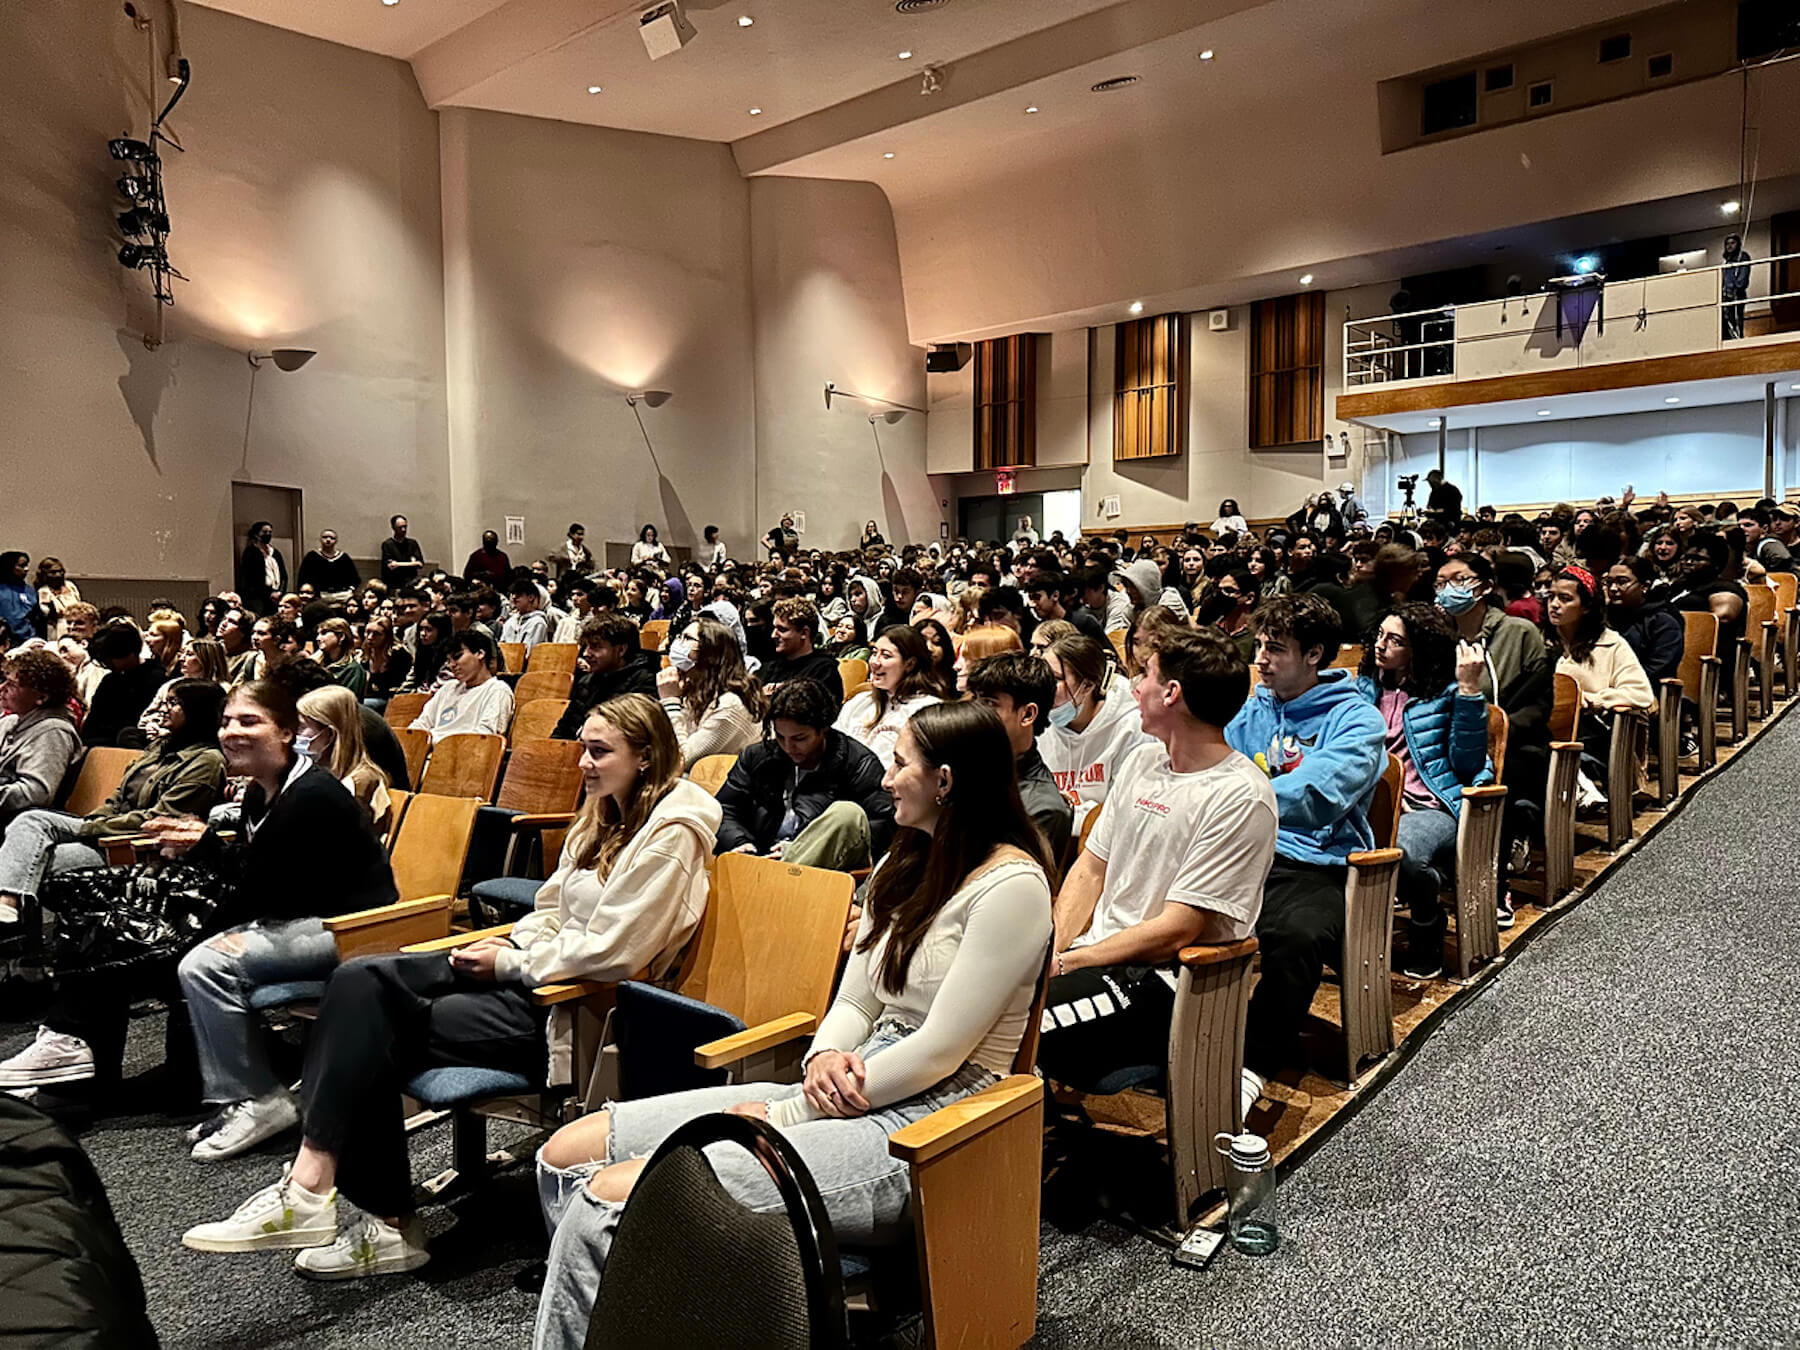 Students at Ethical Culture Fieldston School gather in auditorium for Veterans Day assembly. They sit in the auditorium seats, eyes facing the stage.